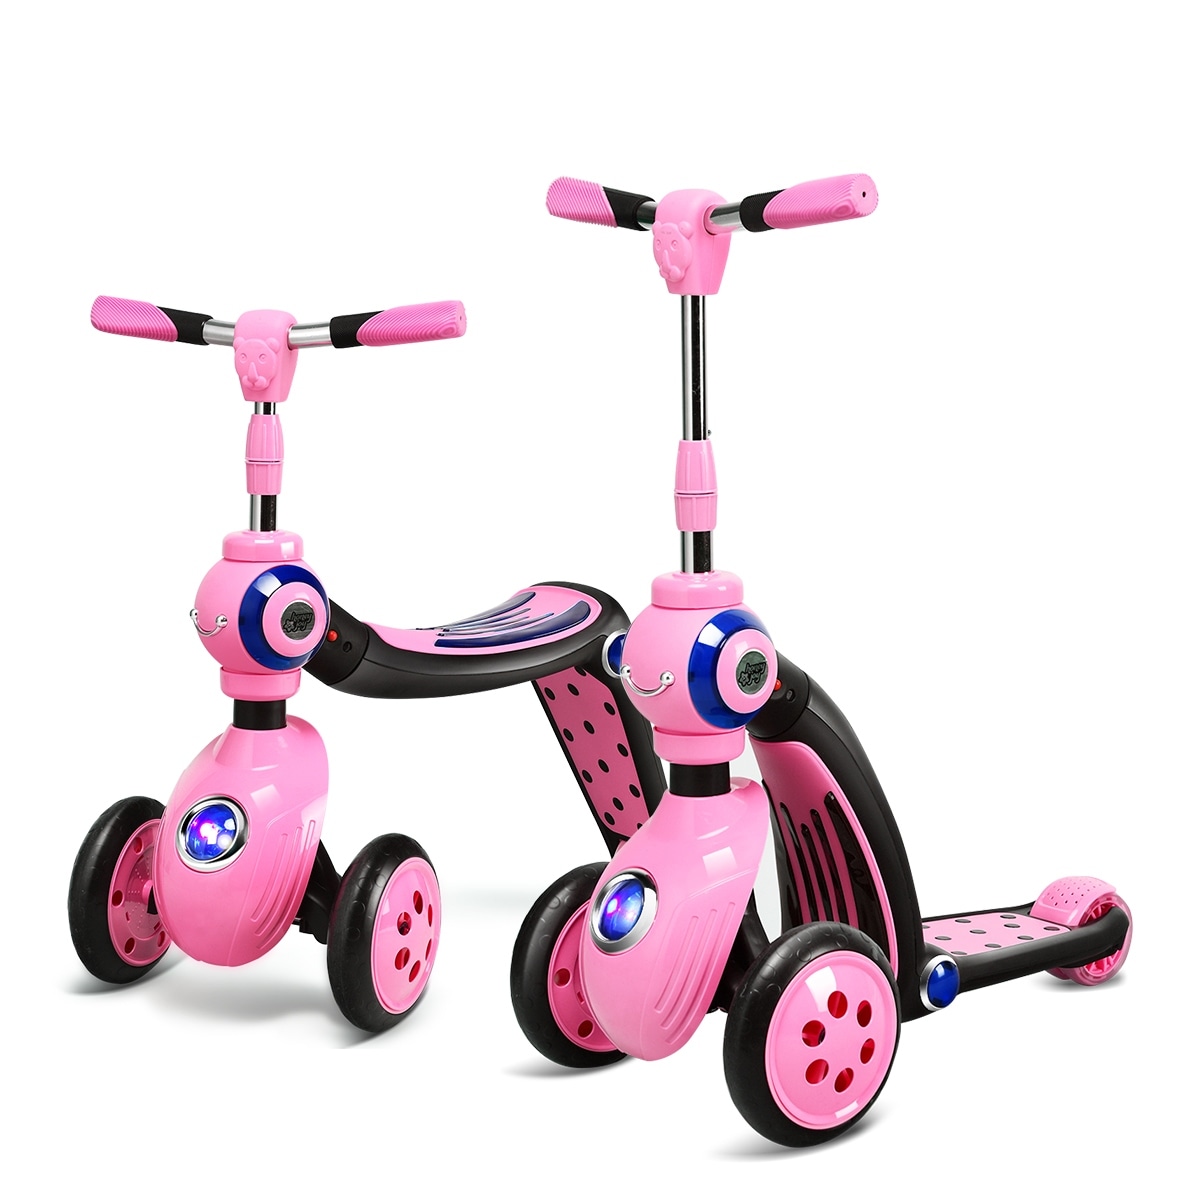 three wheel toy scooter